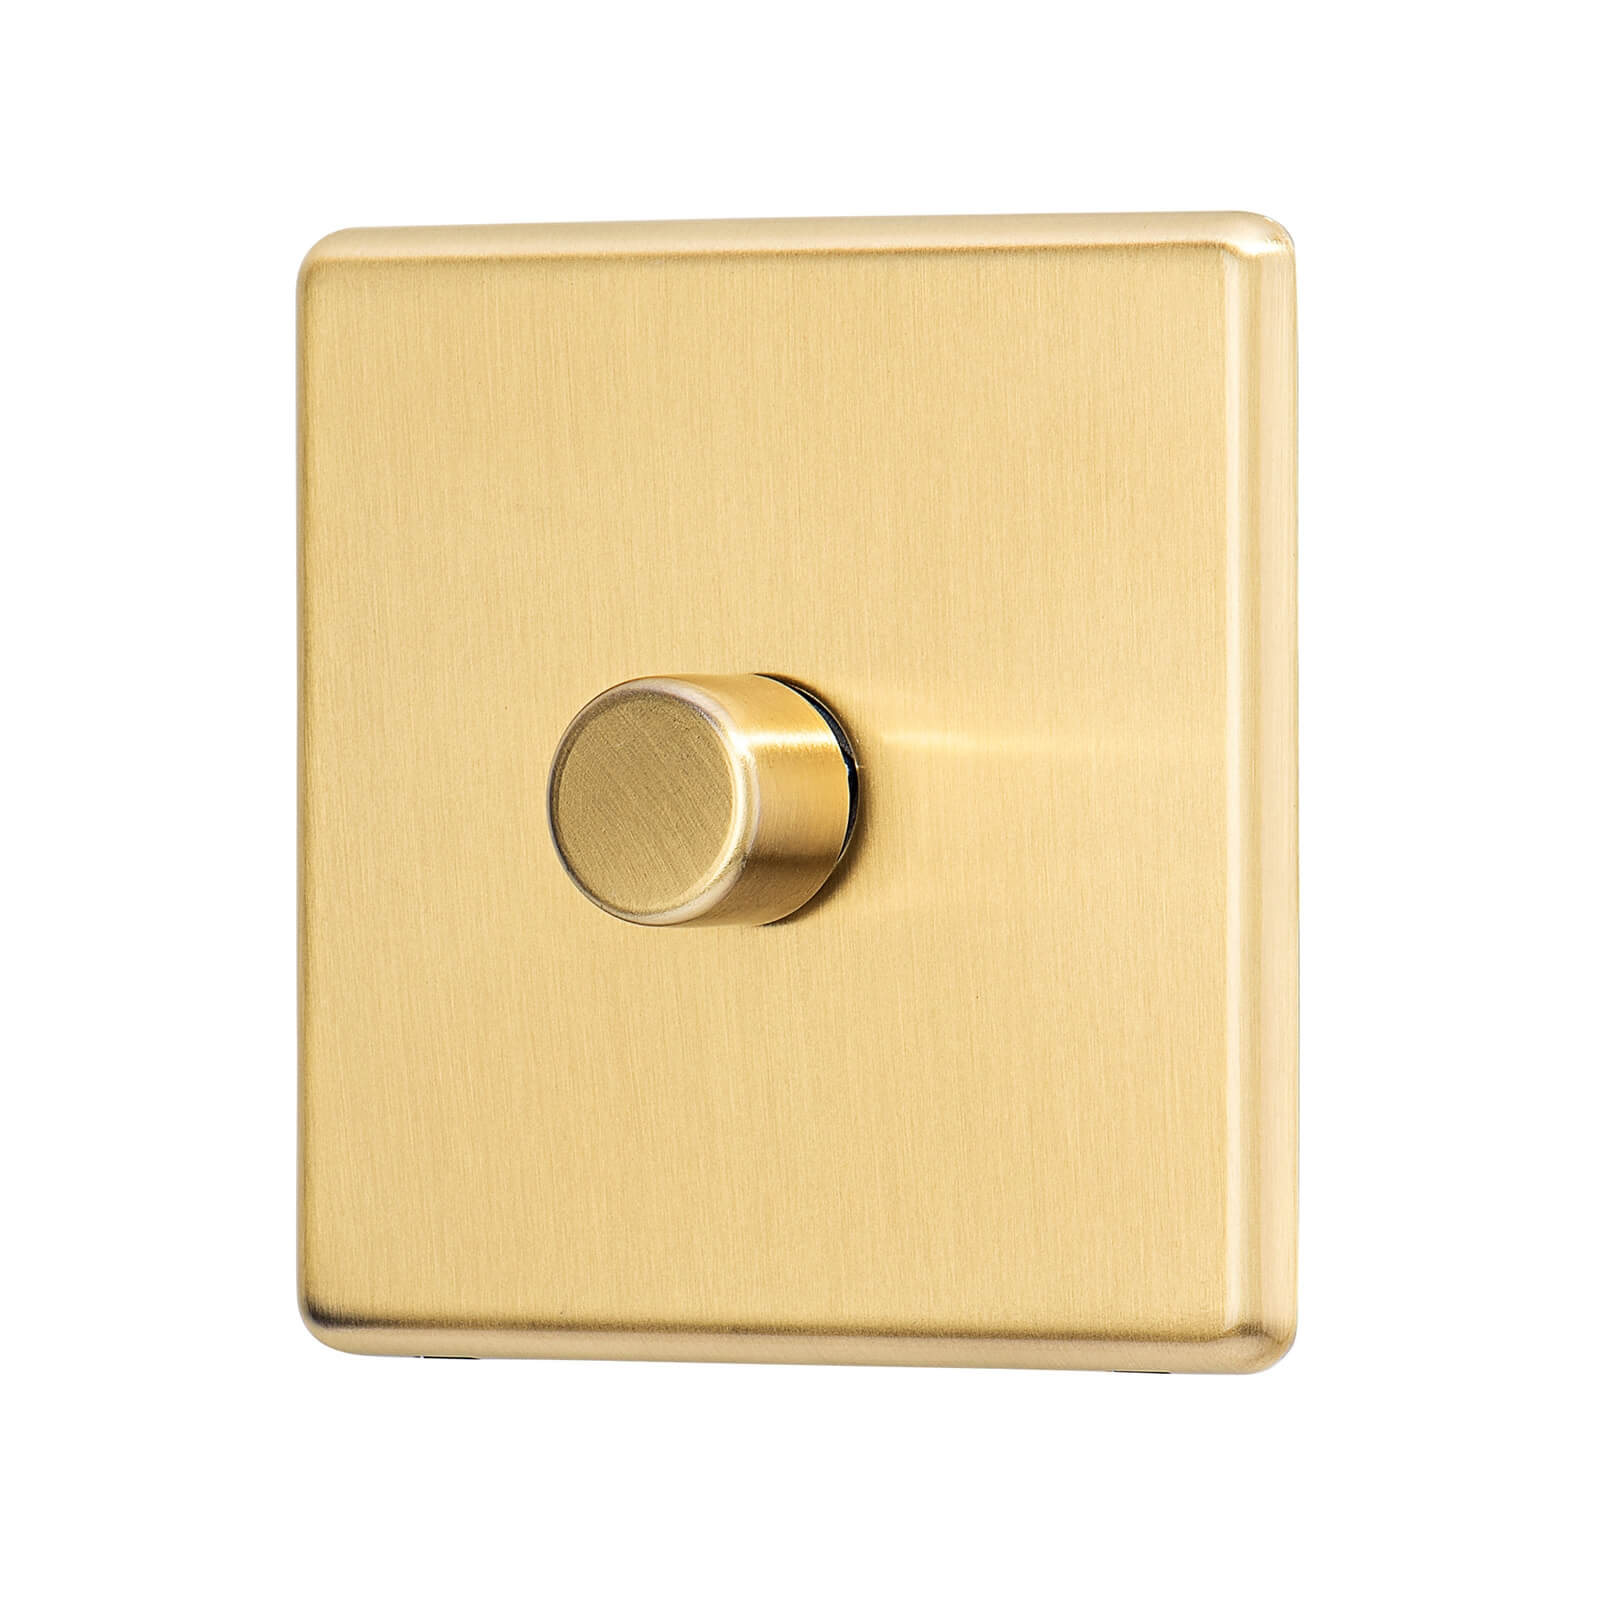 Photo of Arlec Fusion 1 Gang 2 Way Gold Dimmer Switch